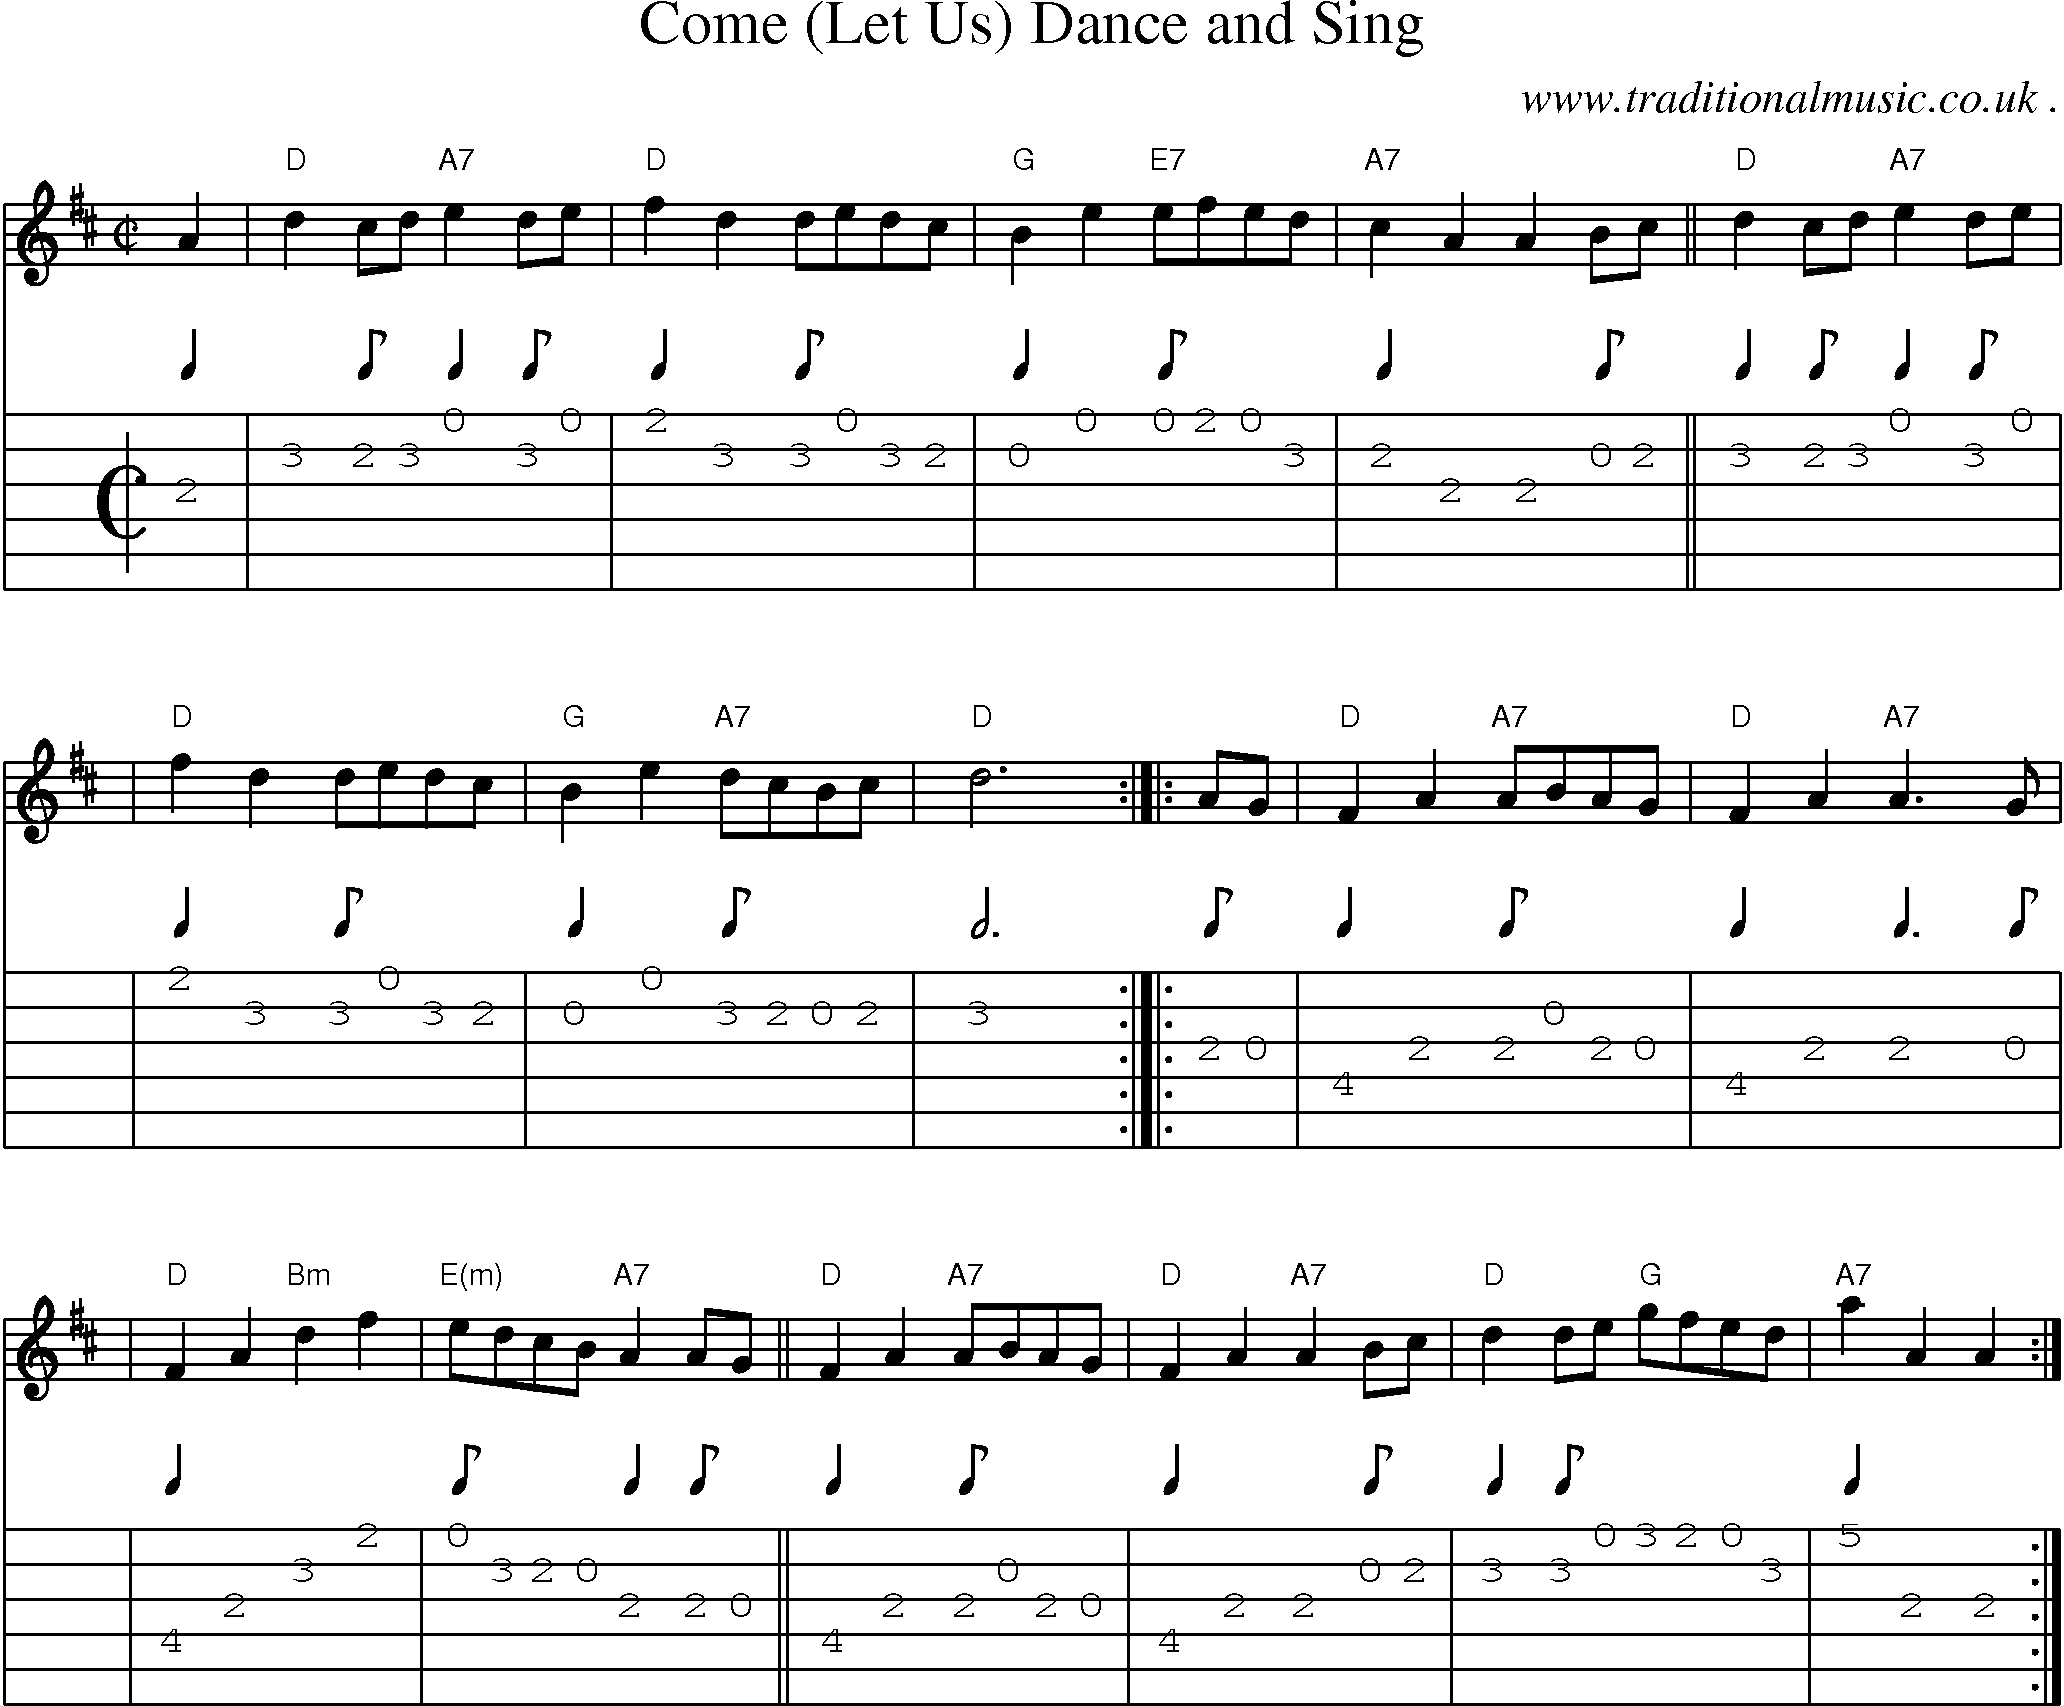 Sheet-music  score, Chords and Guitar Tabs for Come Let Us Dance And Sing